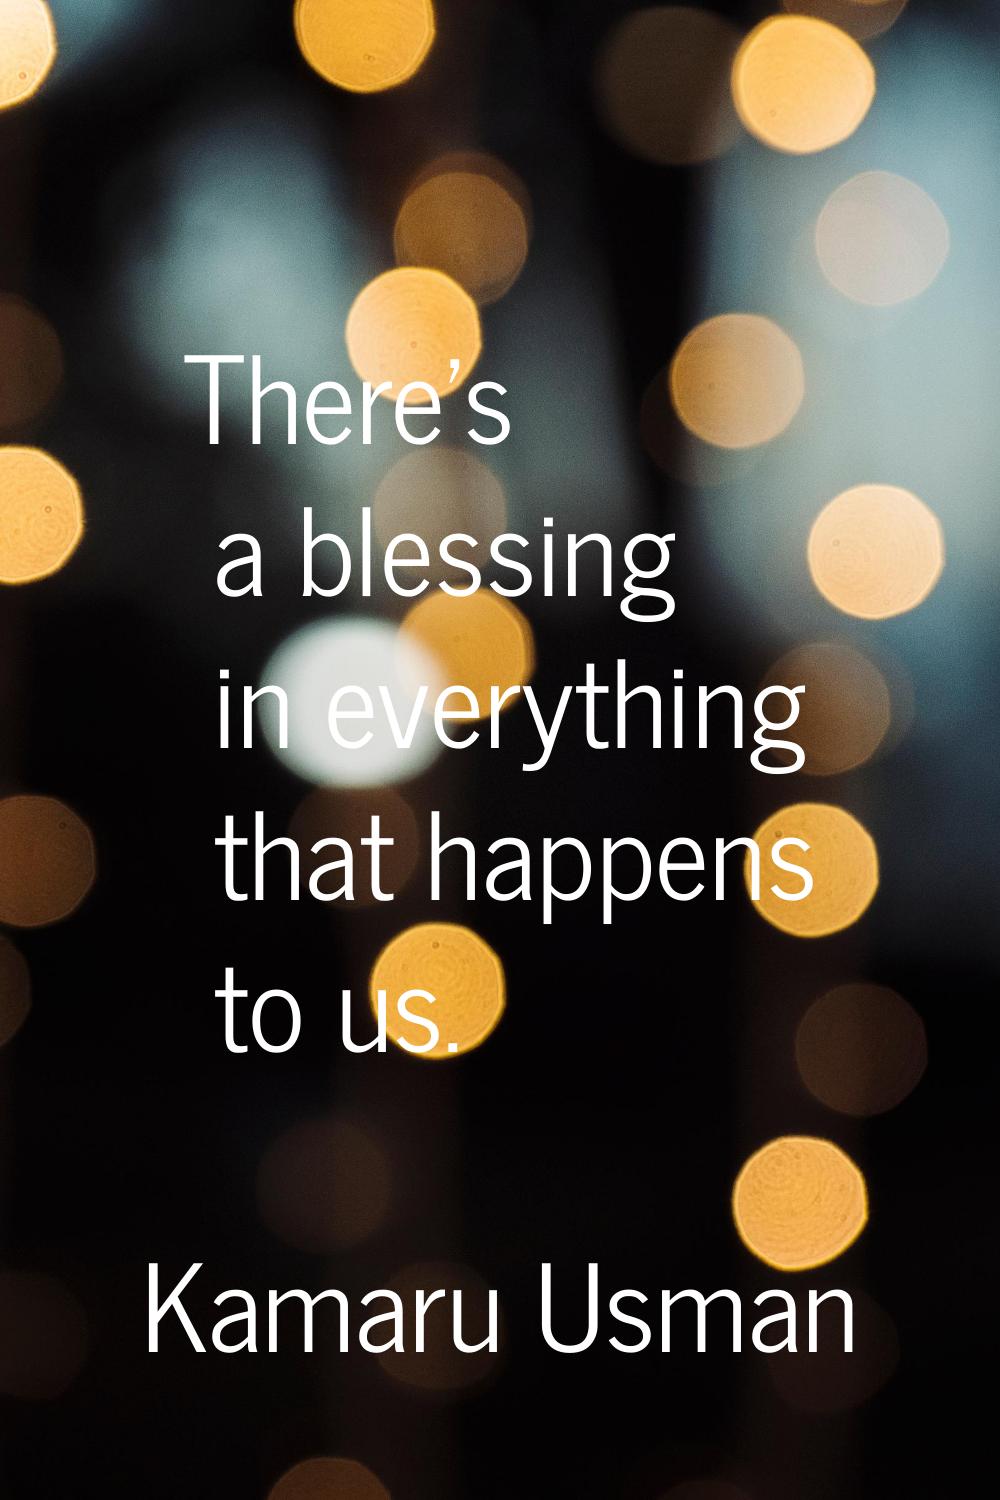 There's a blessing in everything that happens to us.